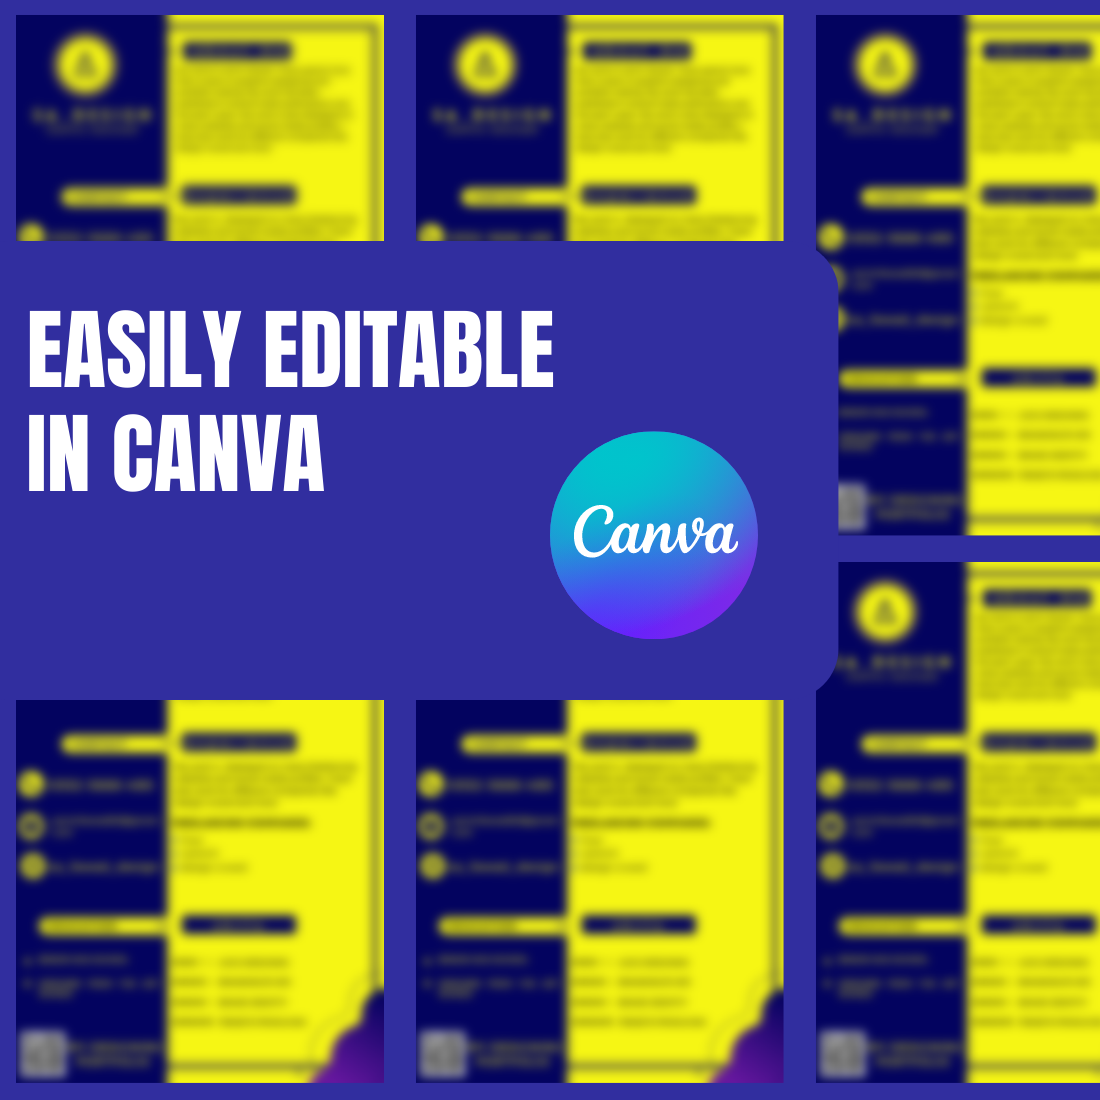 Set of images of colorful resume templates in blue and yellow.